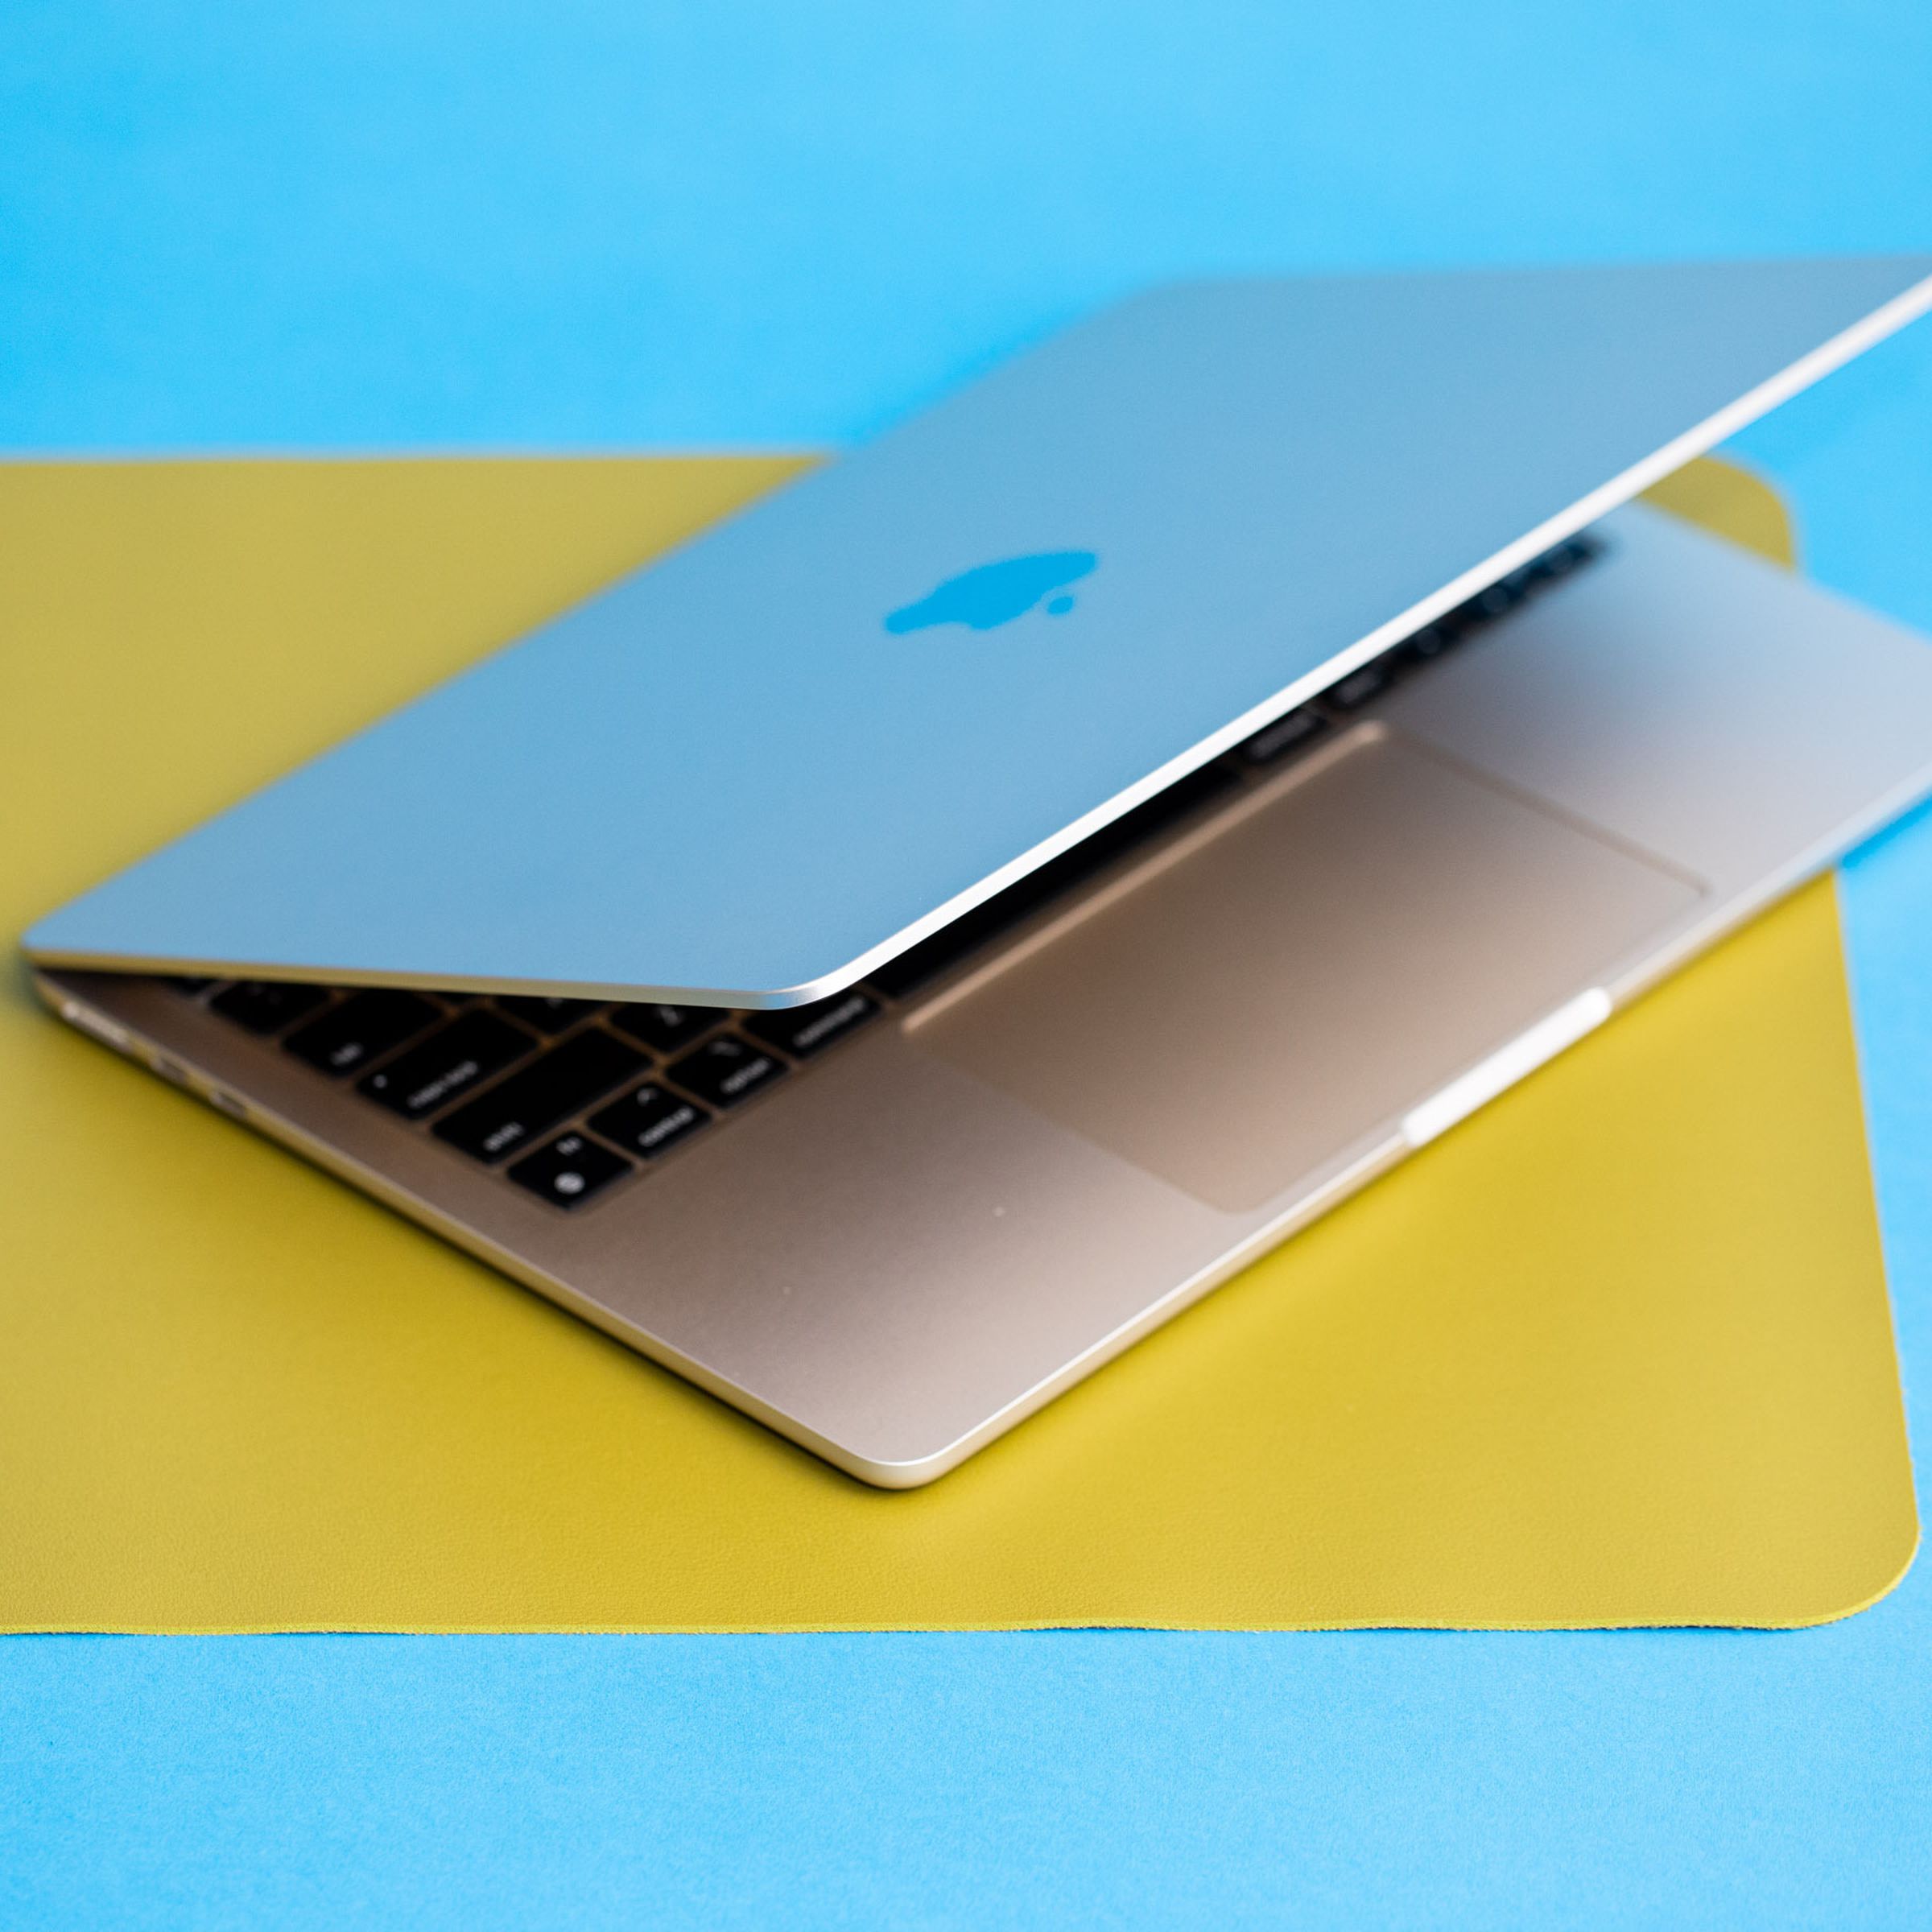 The 13-inch MacBook Air partially open sitting on a yellow mat.